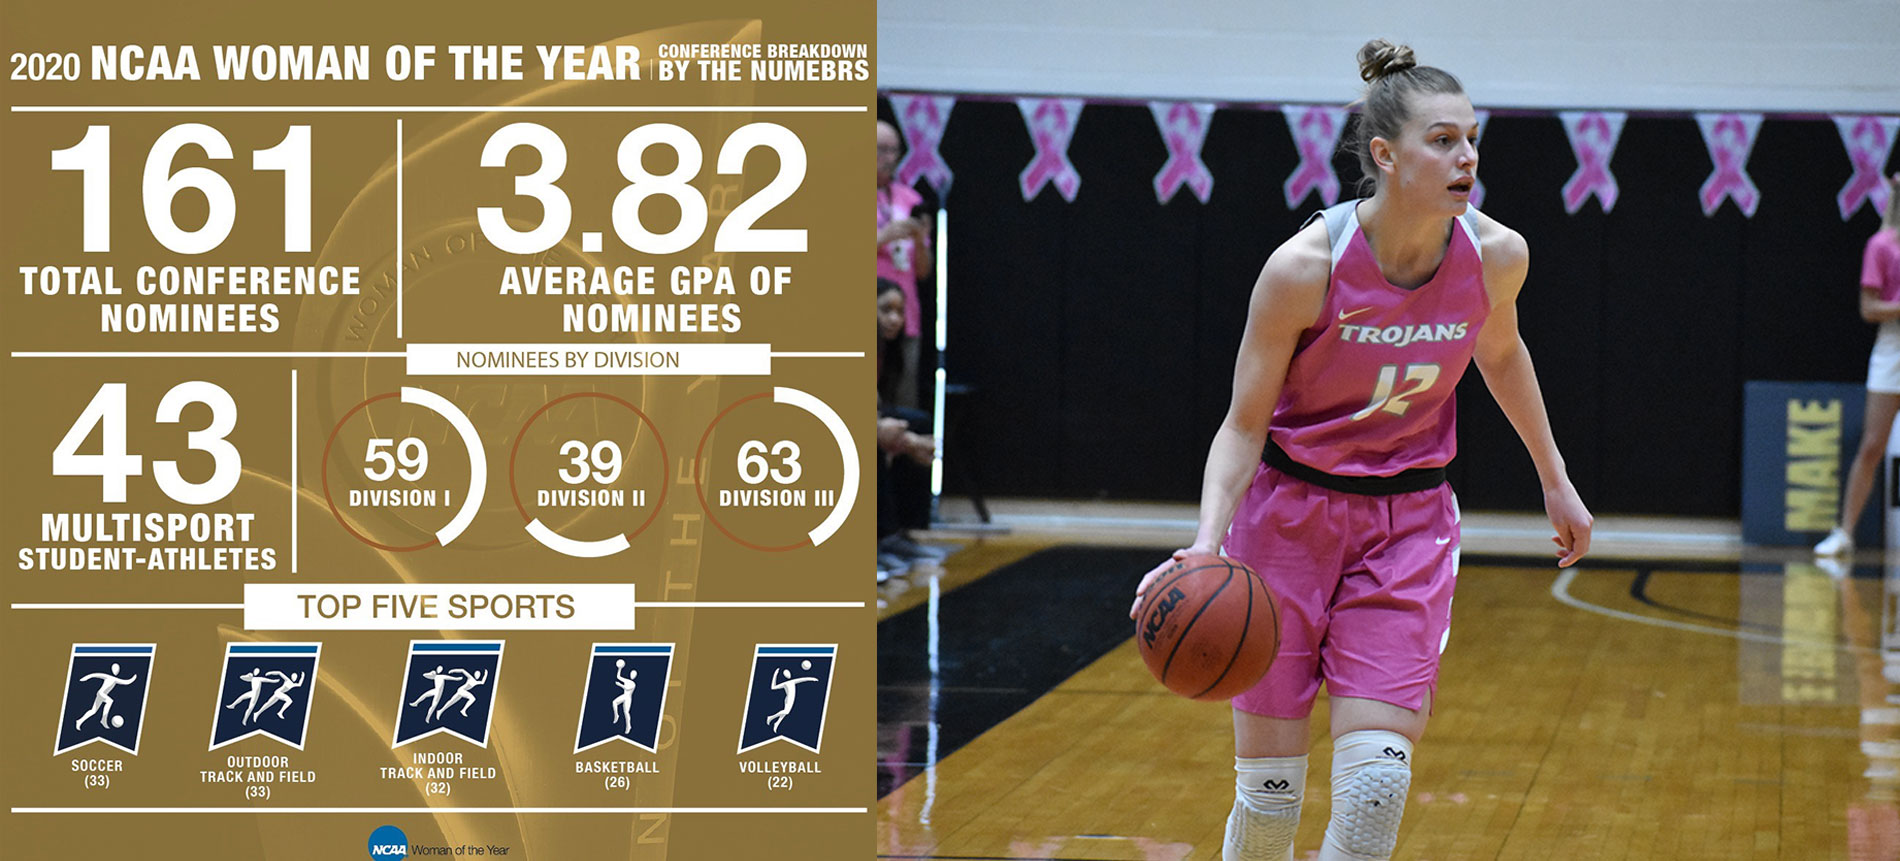 Mollenhauer Named 2019-20 South Atlantic Conference Woman of the Year; Becomes conference-level nominee for the 2020 NCAA Woman of the Year